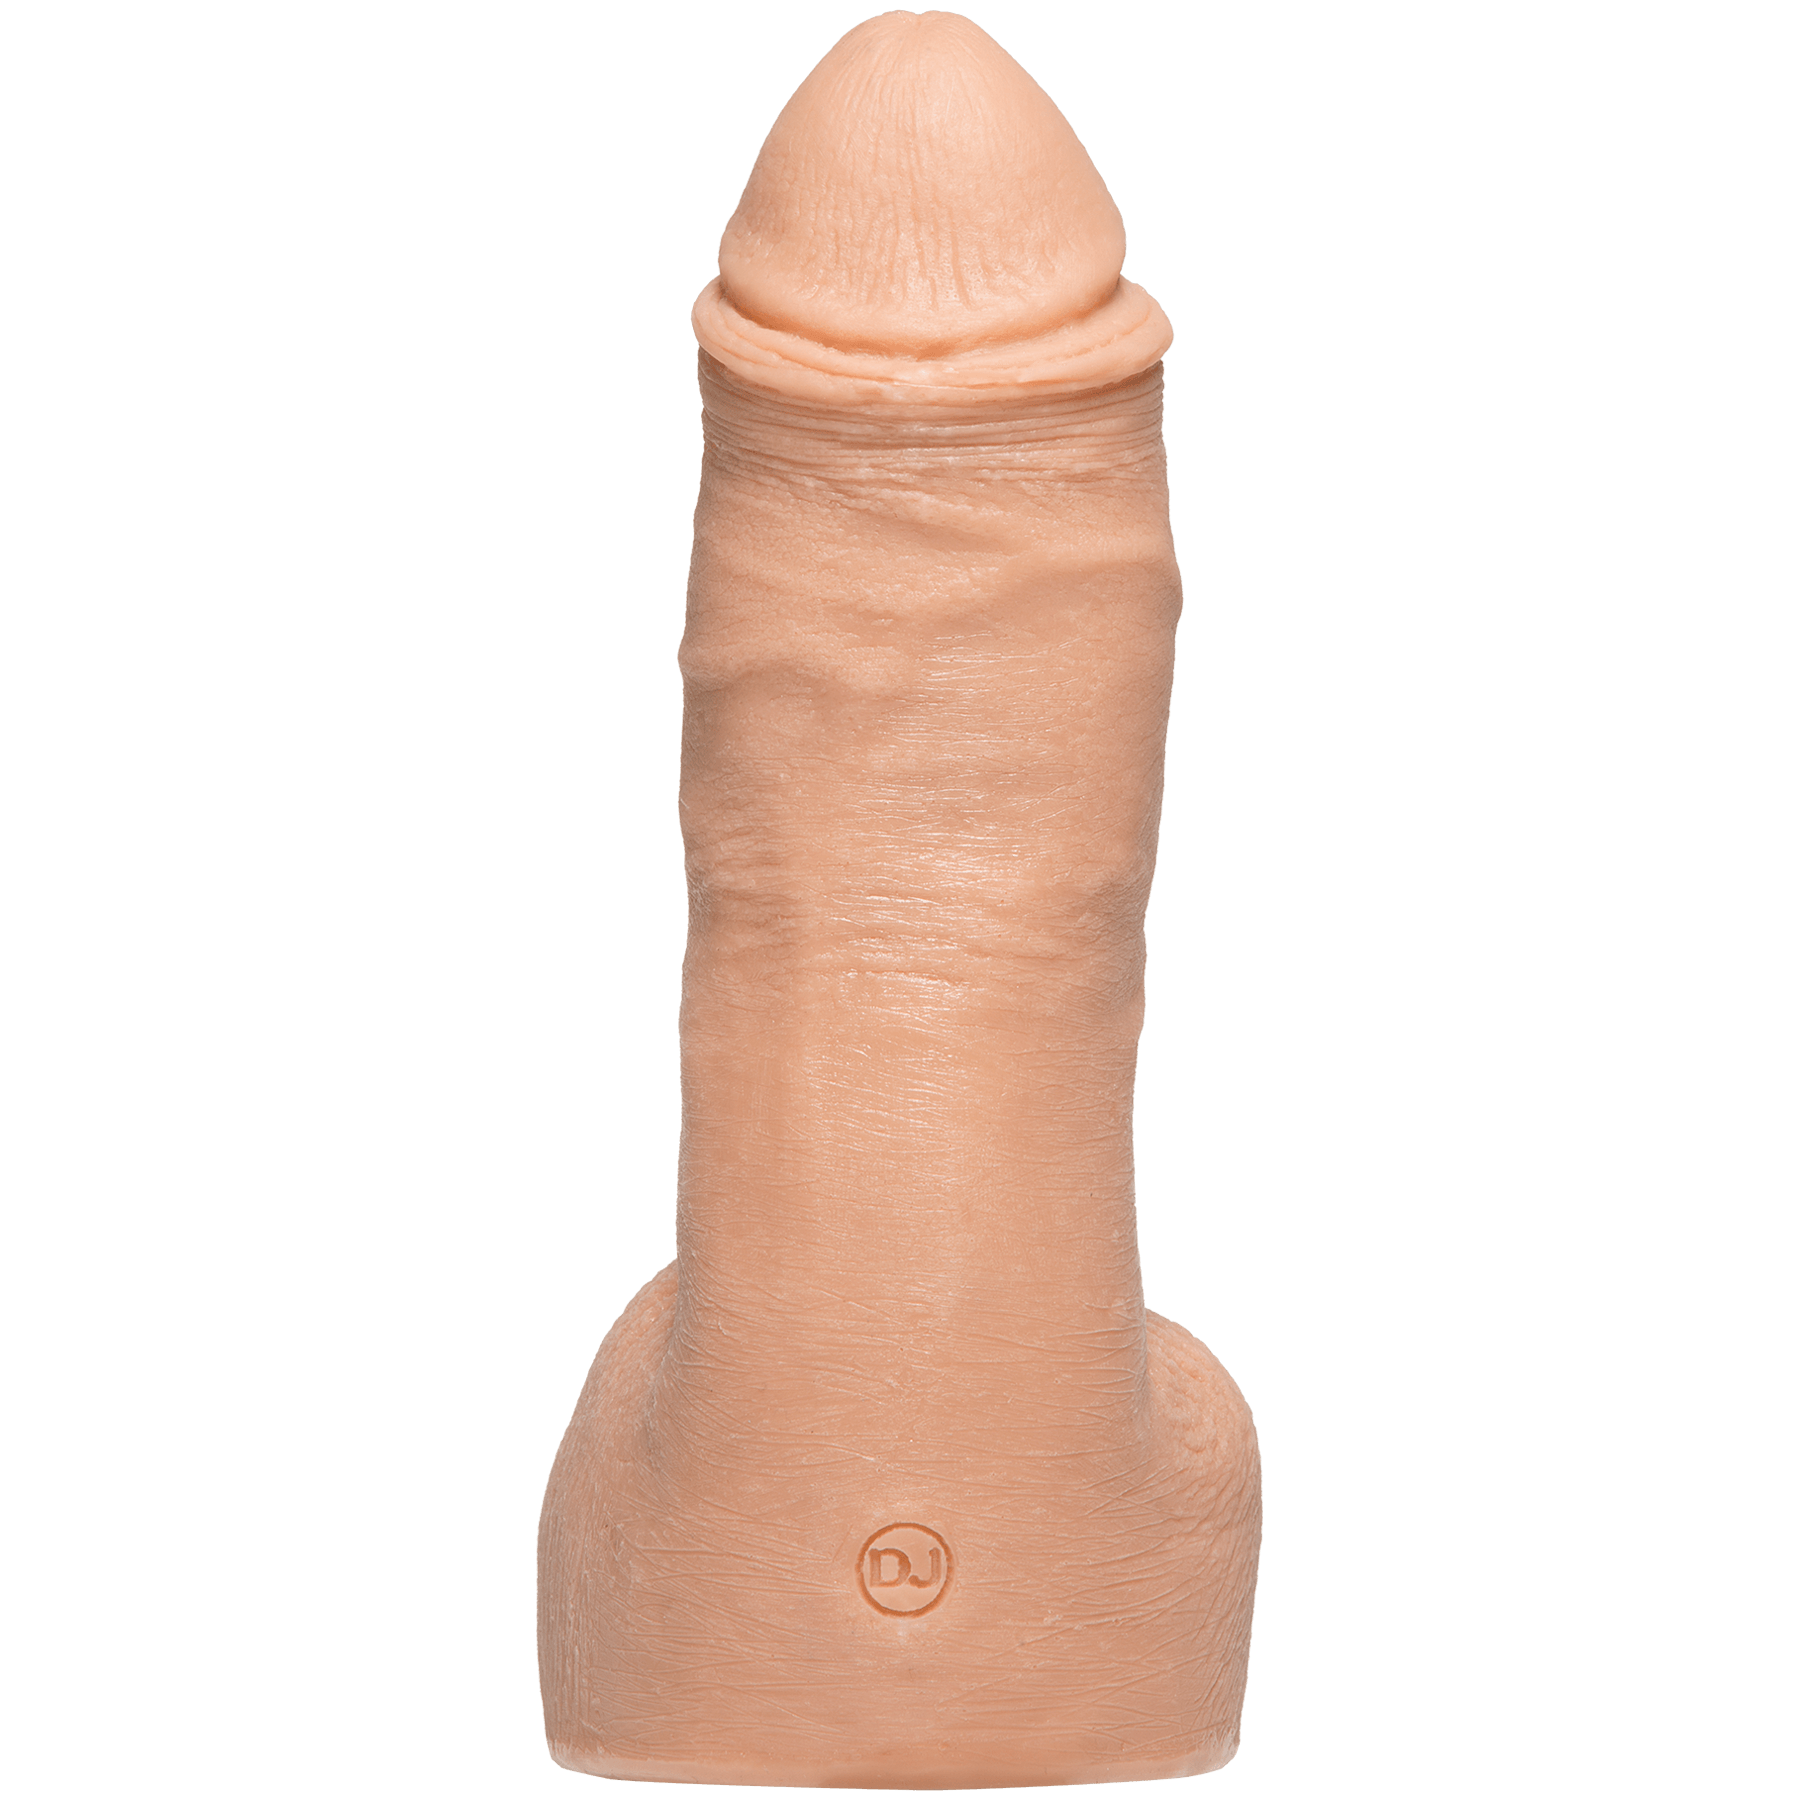 Doc Johnson Signature Cocks Ryan Bones Ultrasky 7in Cock - Buy At Luxury Toy X - Free 3-Day Shipping